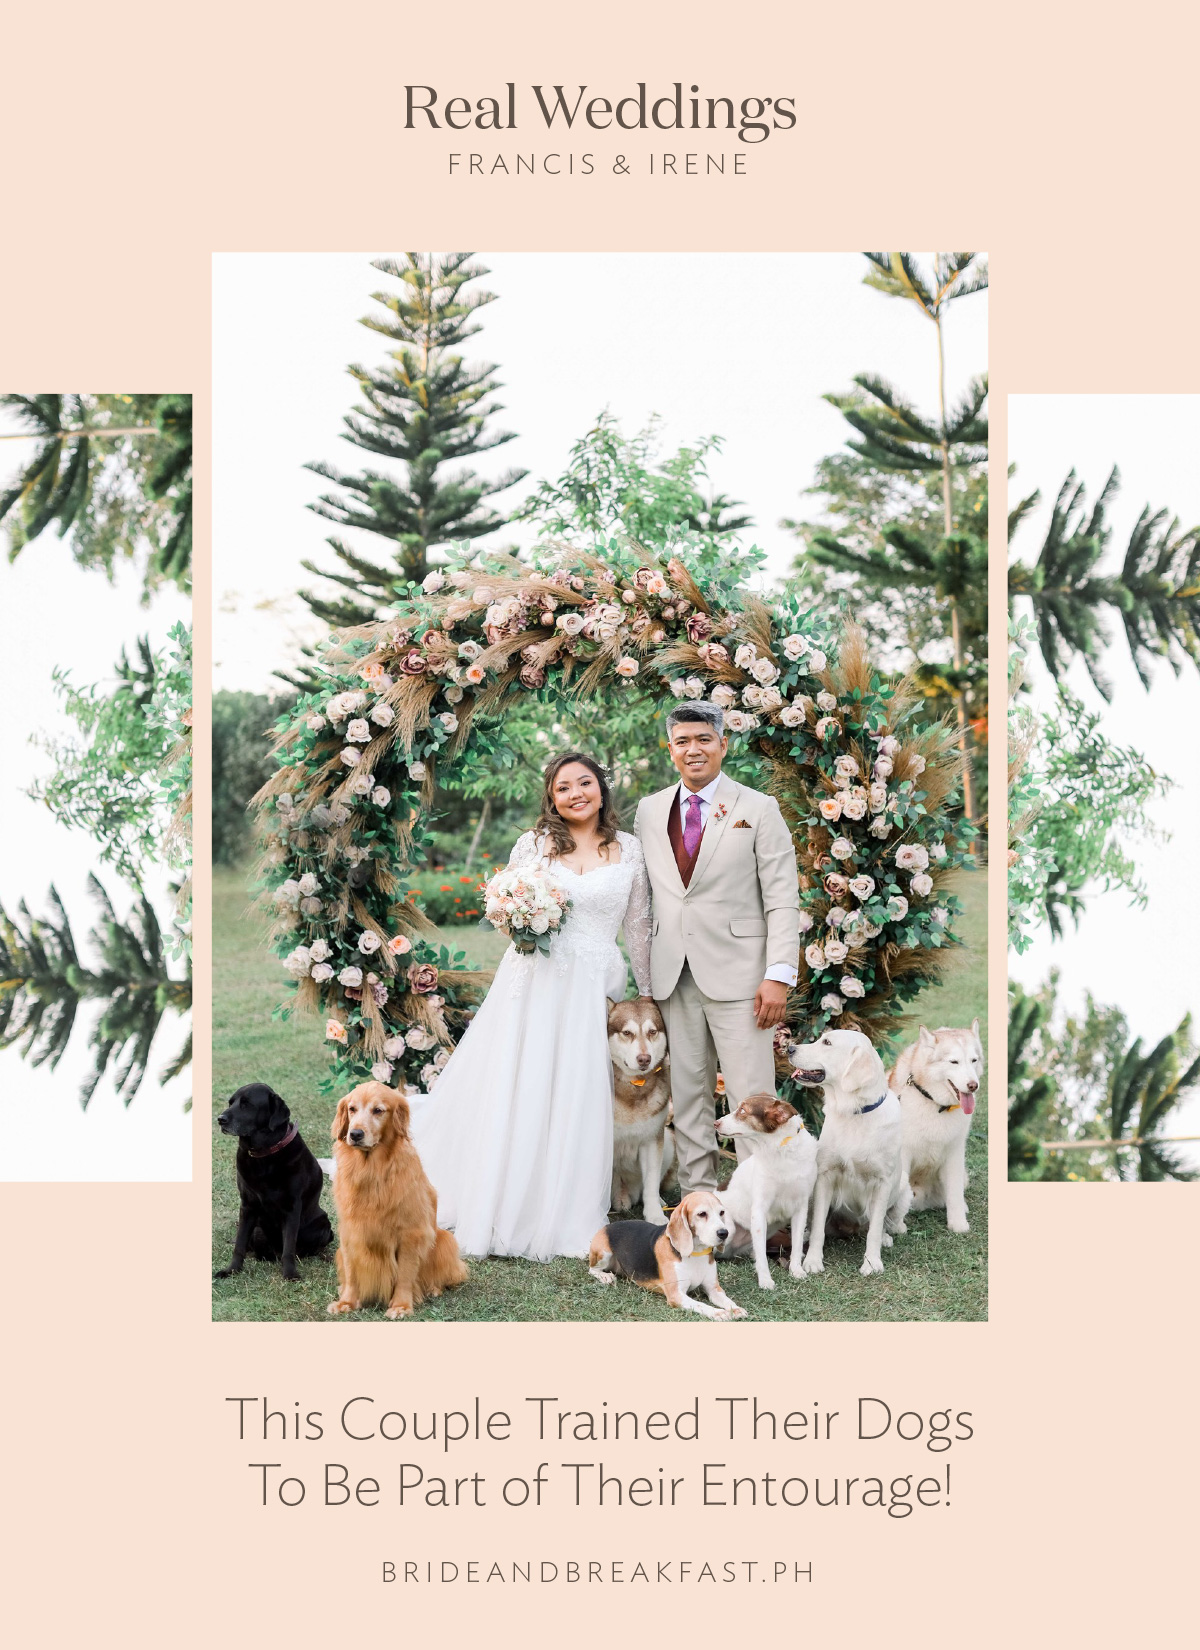 This Couple Trained Their Dogs To Be Part of Their Entourage!